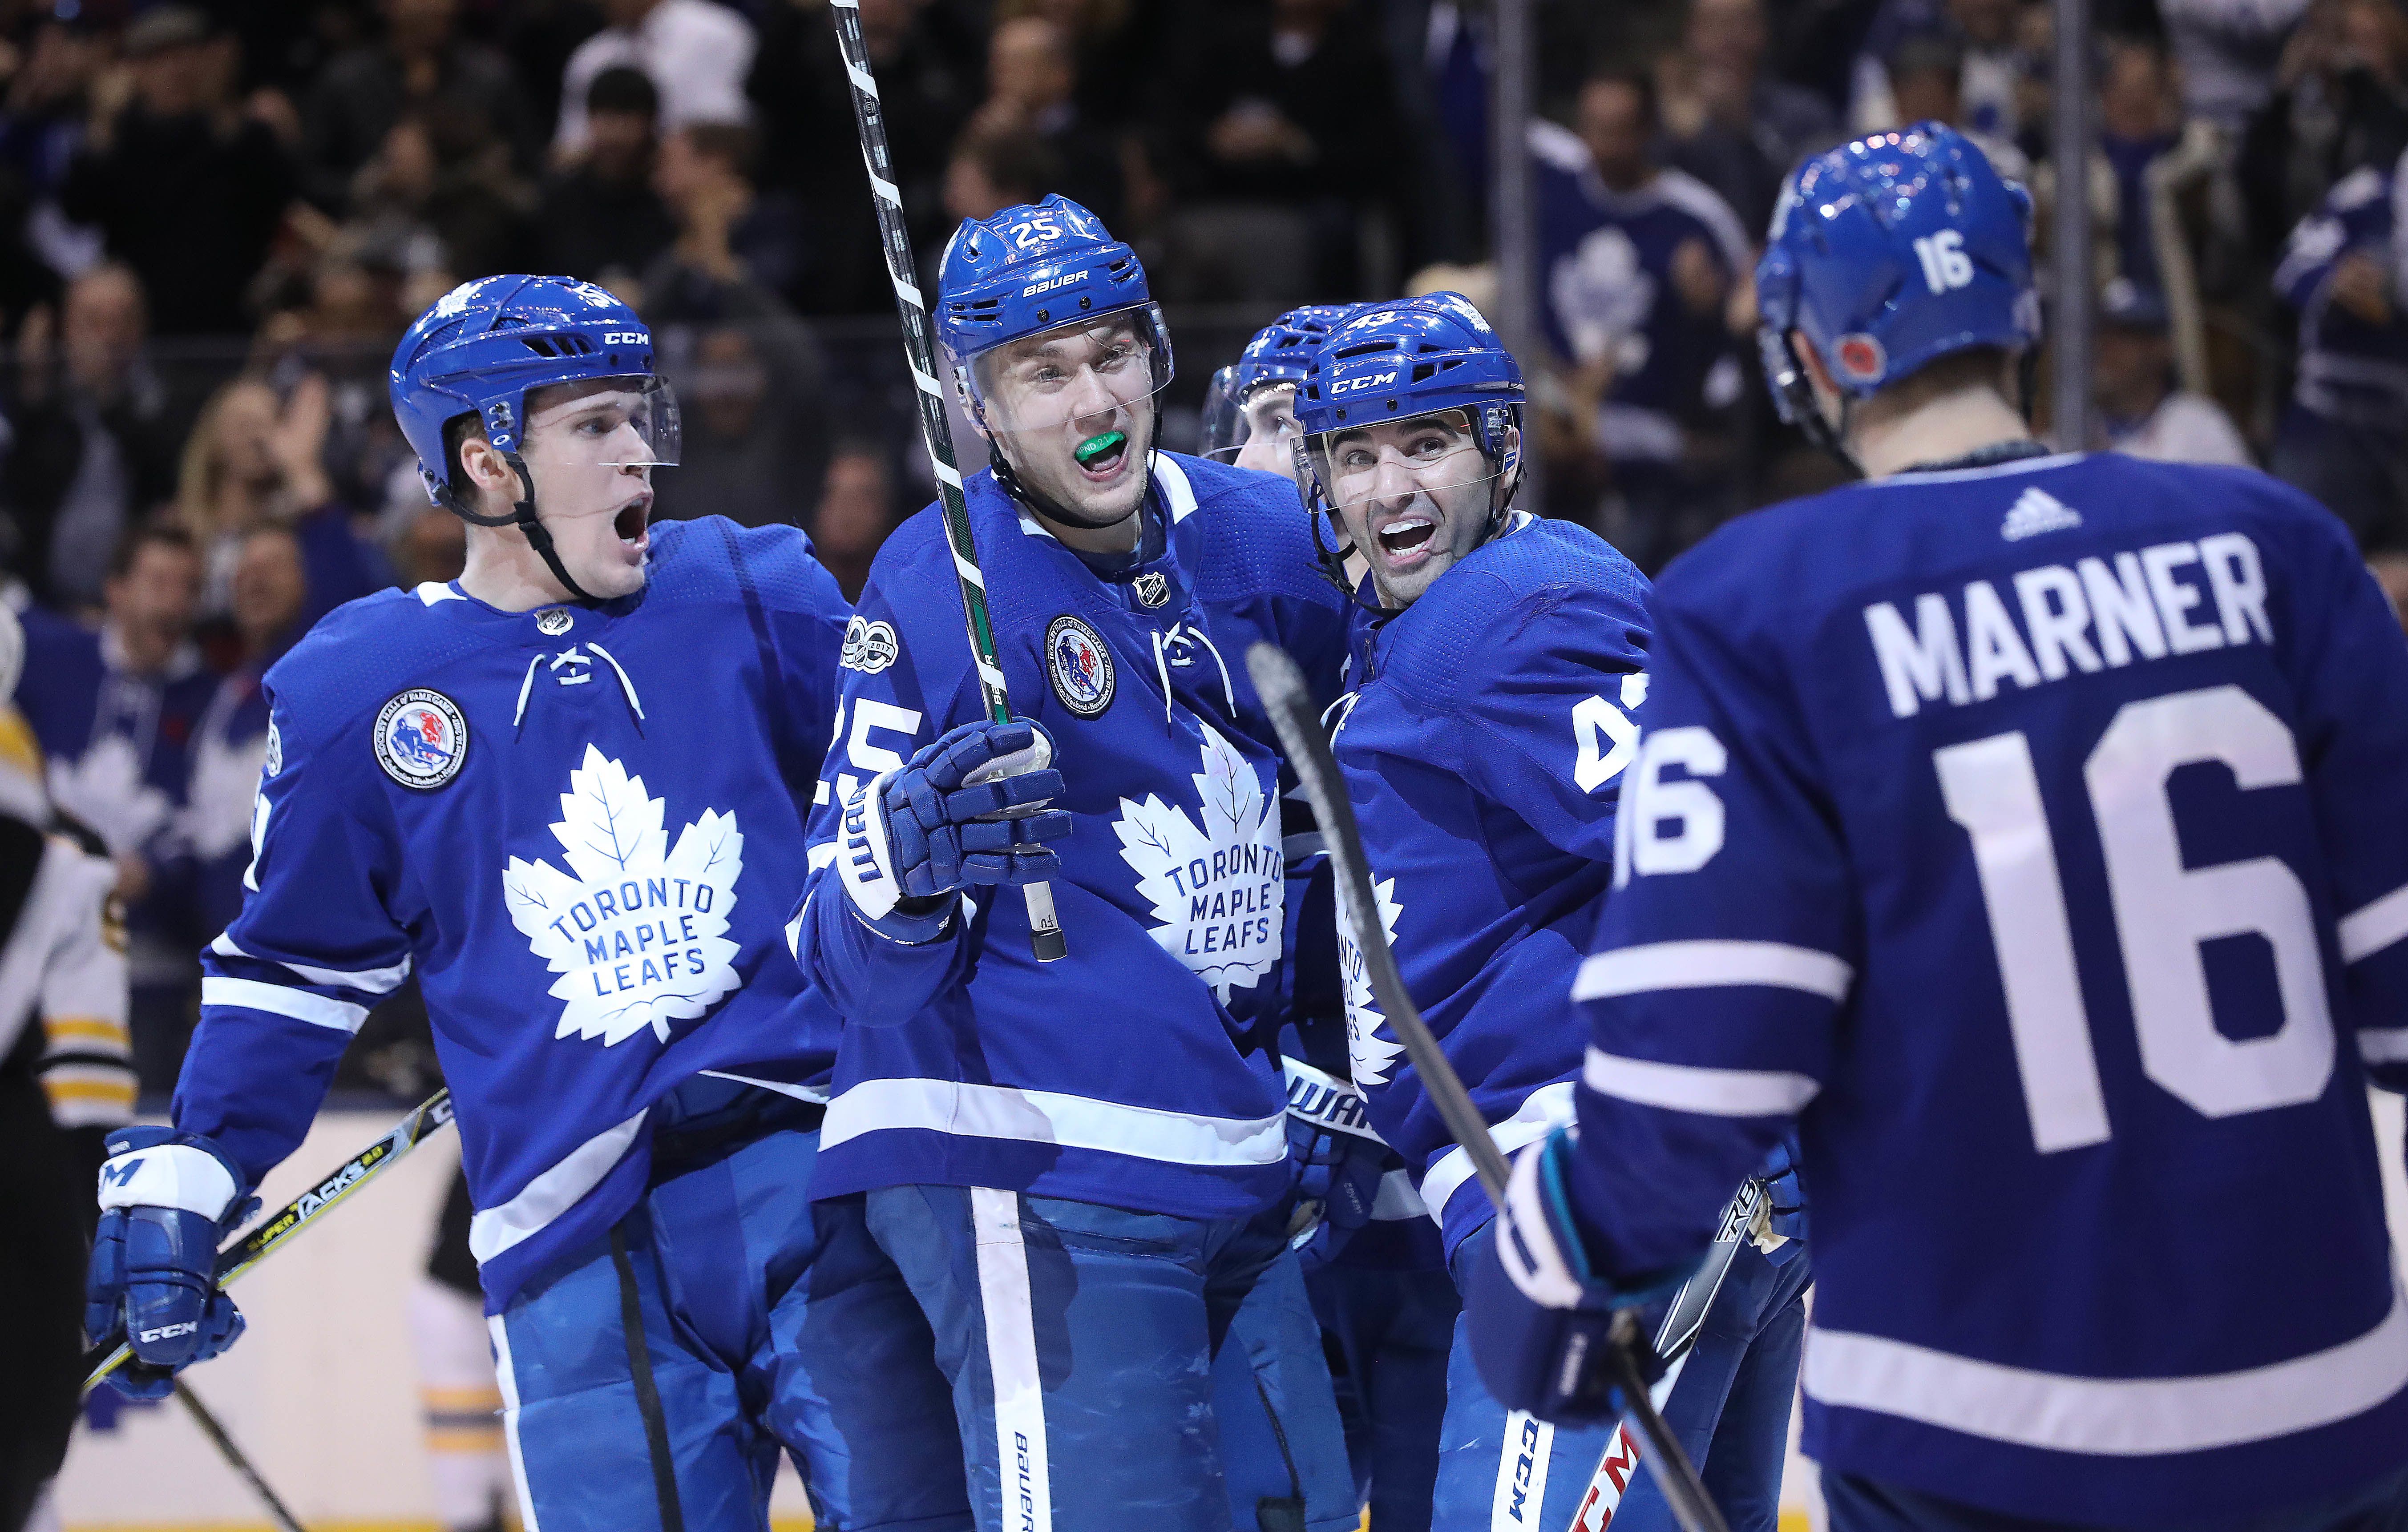 Toronto Maple Leafs: JVR Is Going To Get Paid